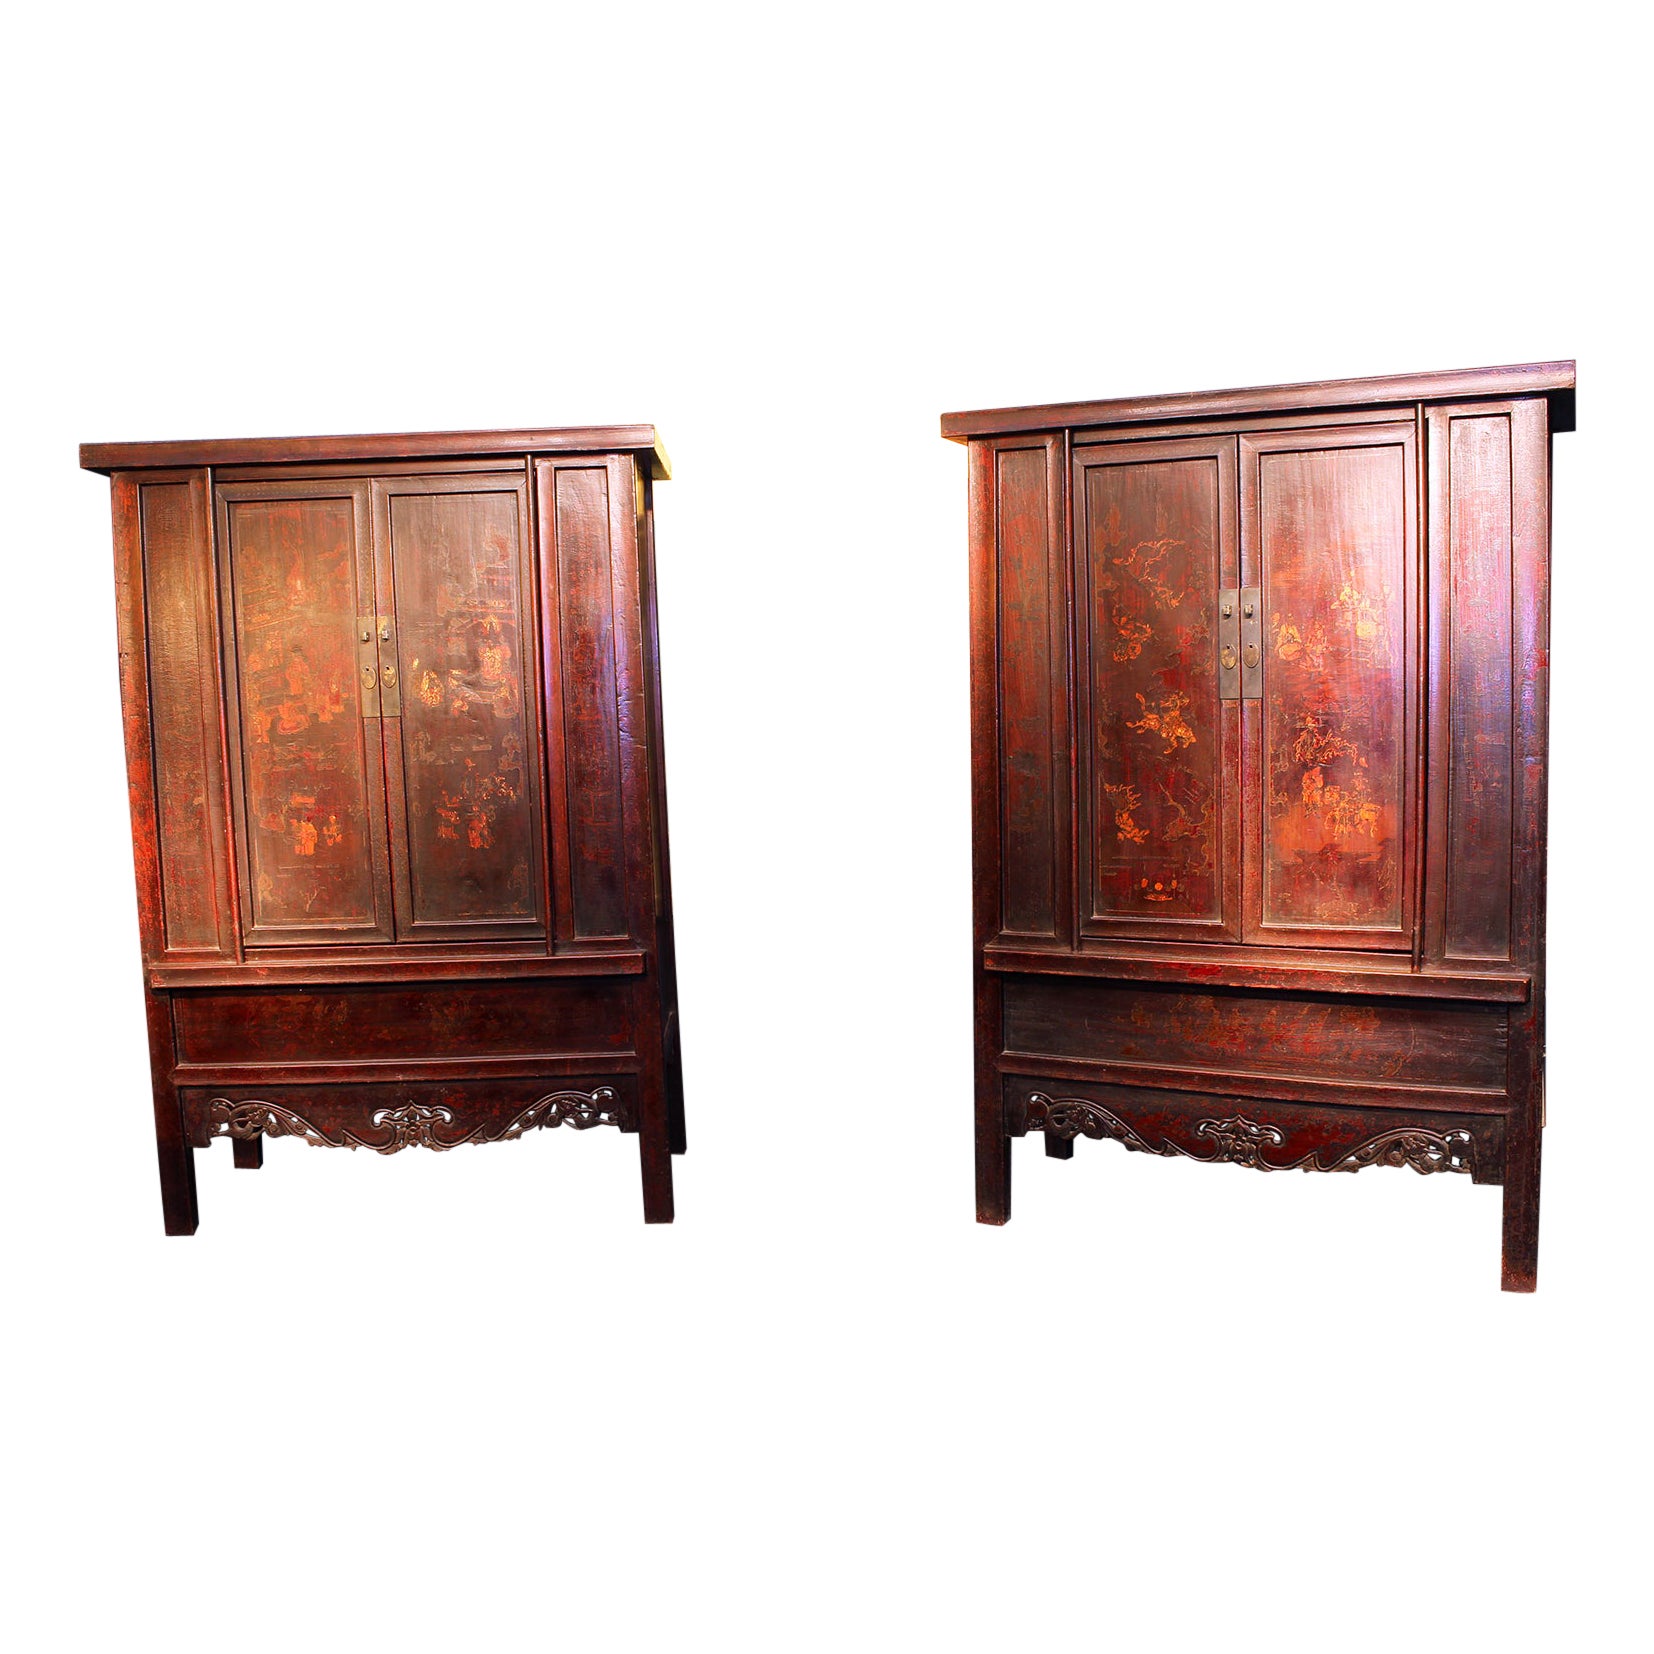 Pair of Chinese Red Gilded Lacquered Bookcase Cabinets from the 18th Century For Sale